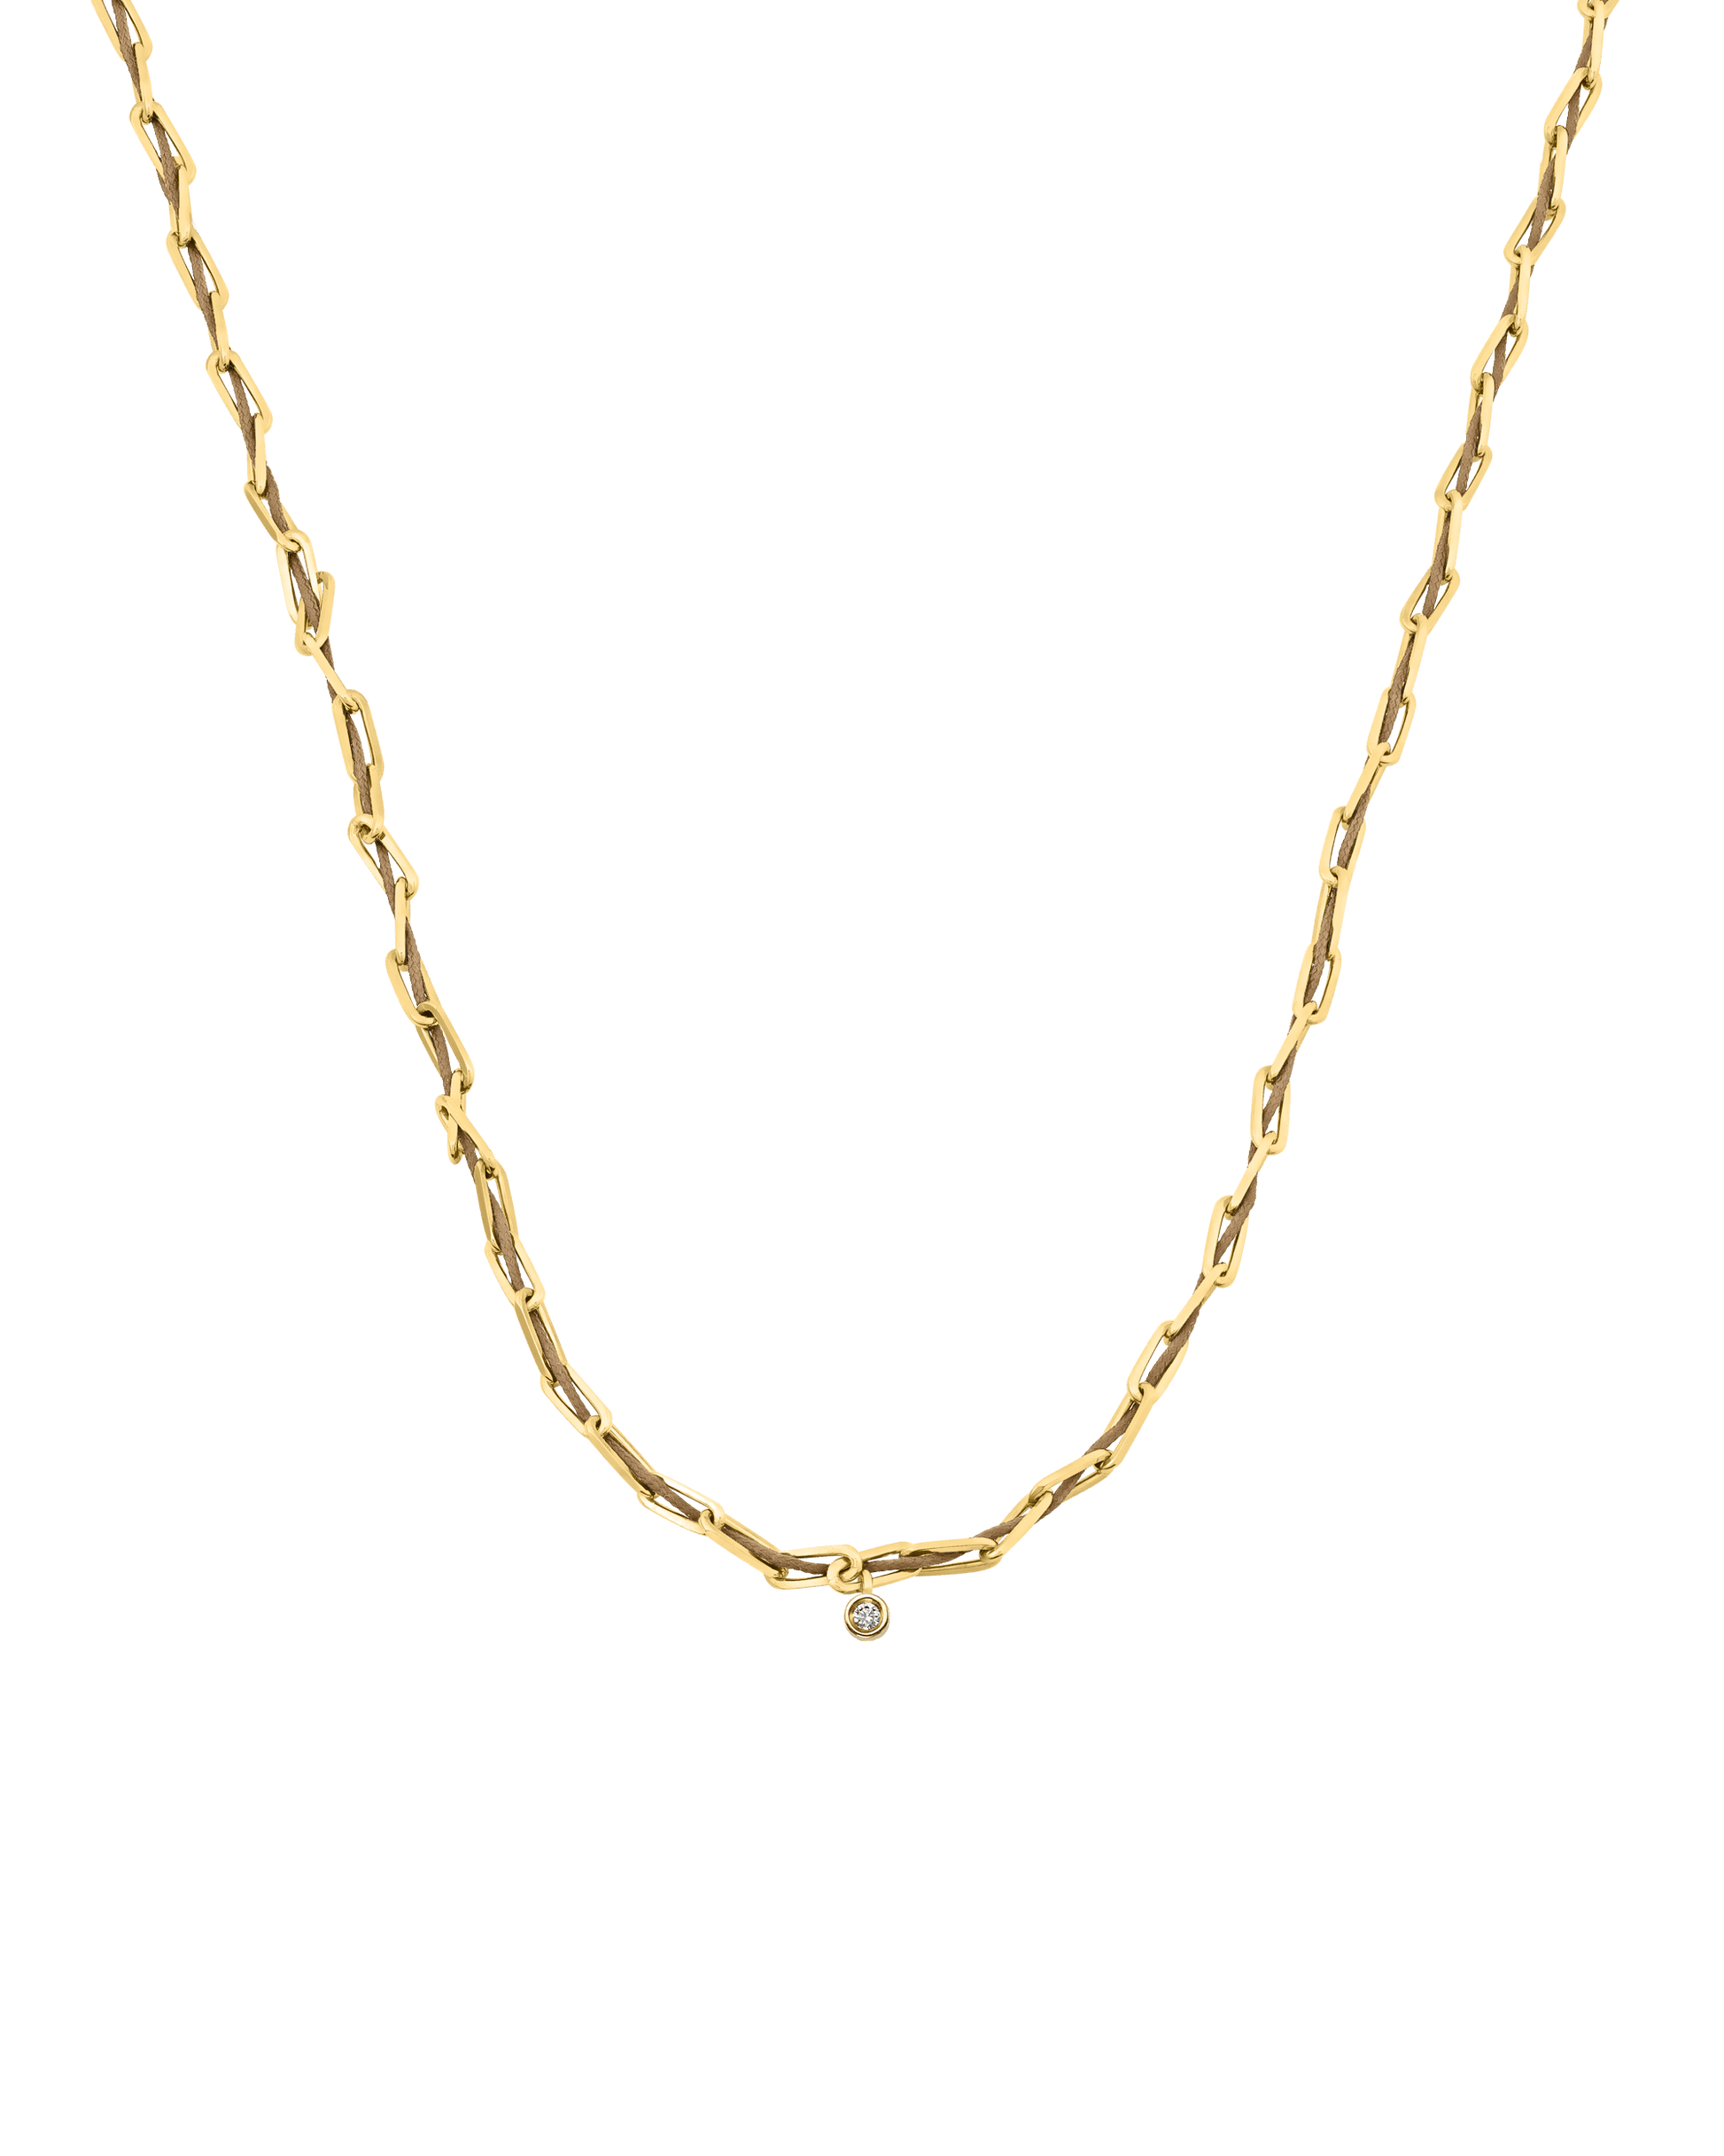 Twine Diamond Necklace - 18K Gold Vermeil Necklaces magal-dev Camel Small: 0.03ct 16"